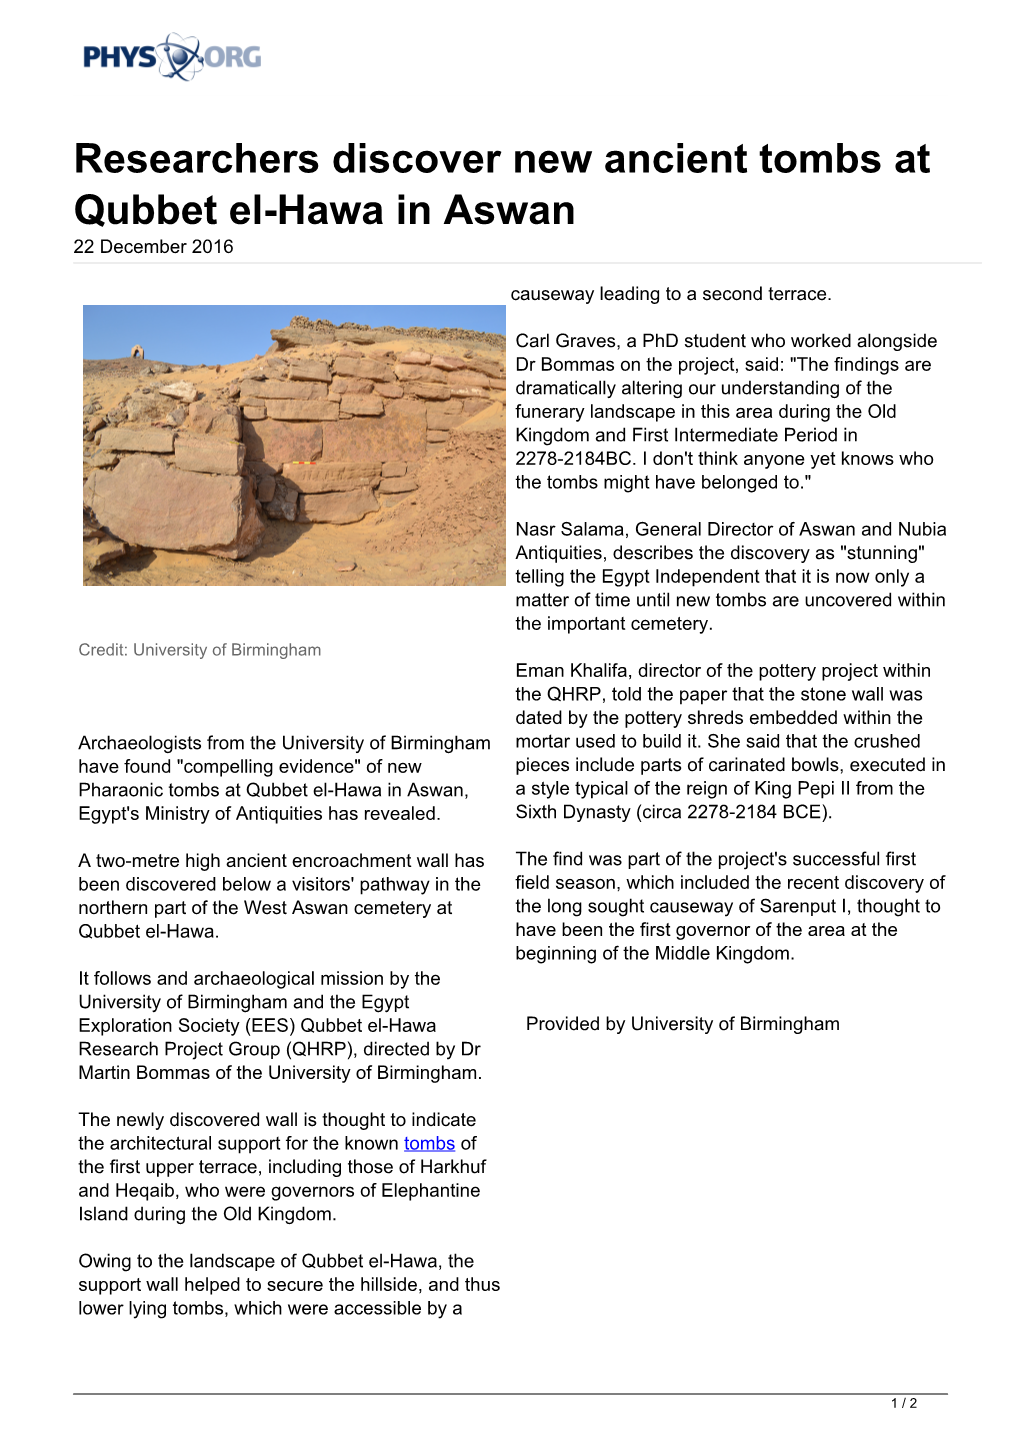 Researchers Discover New Ancient Tombs at Qubbet El-Hawa in Aswan 22 December 2016